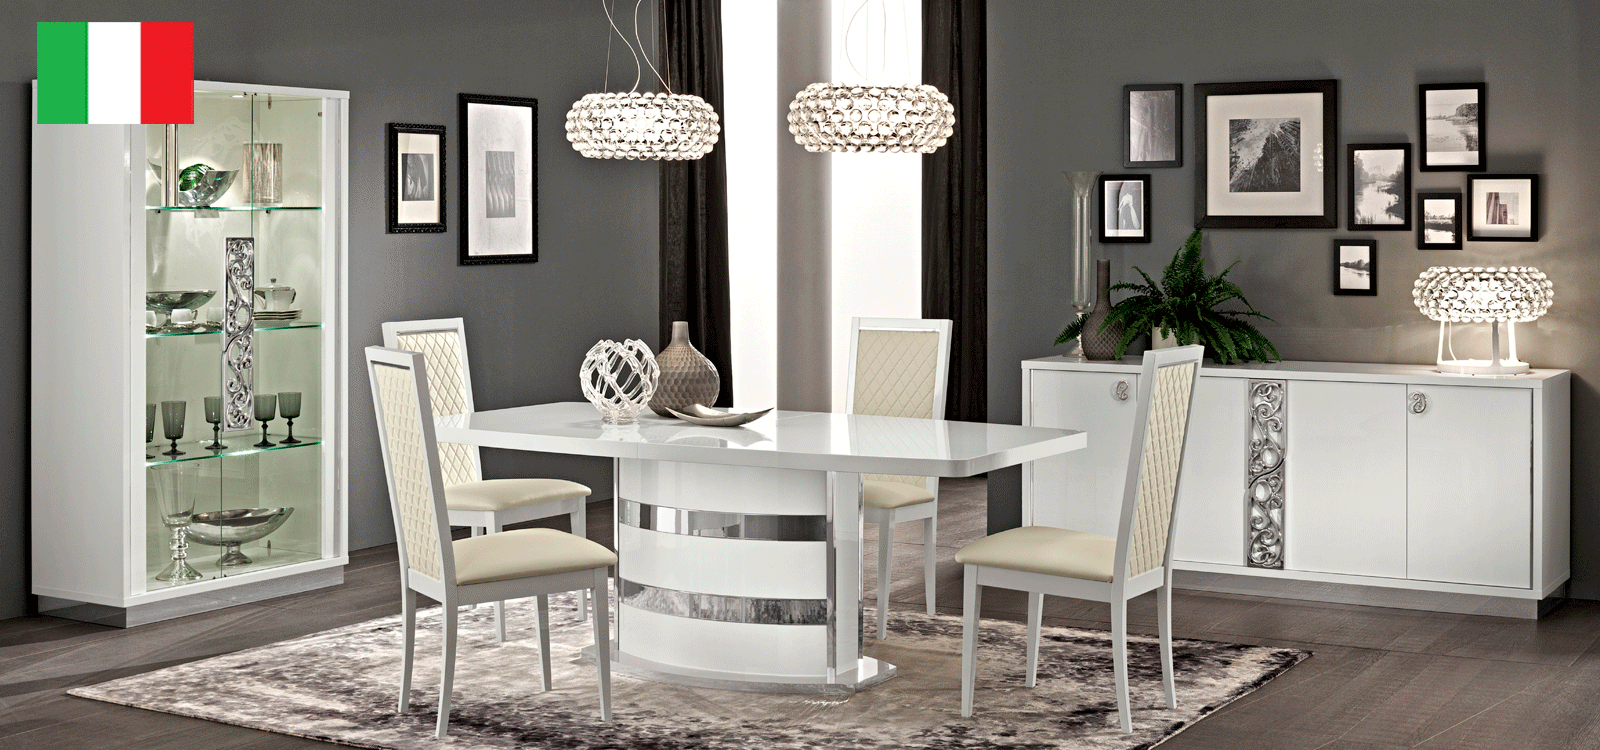 Brands Camel Classic Collection, Italy Roma Dining White, Italy